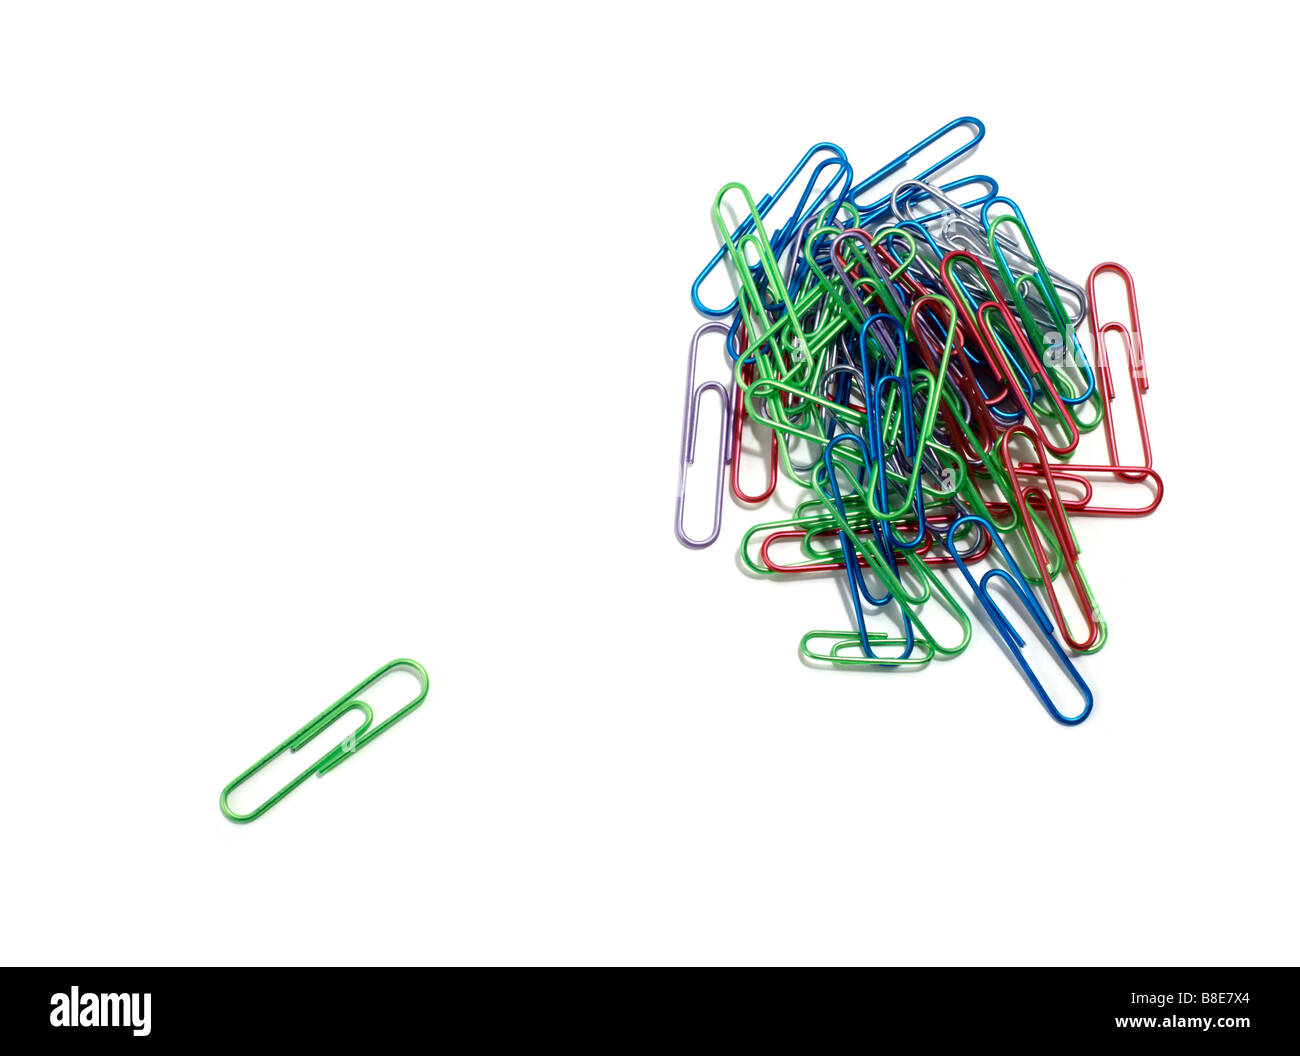 Pile of metal Paperclips Stock Photo